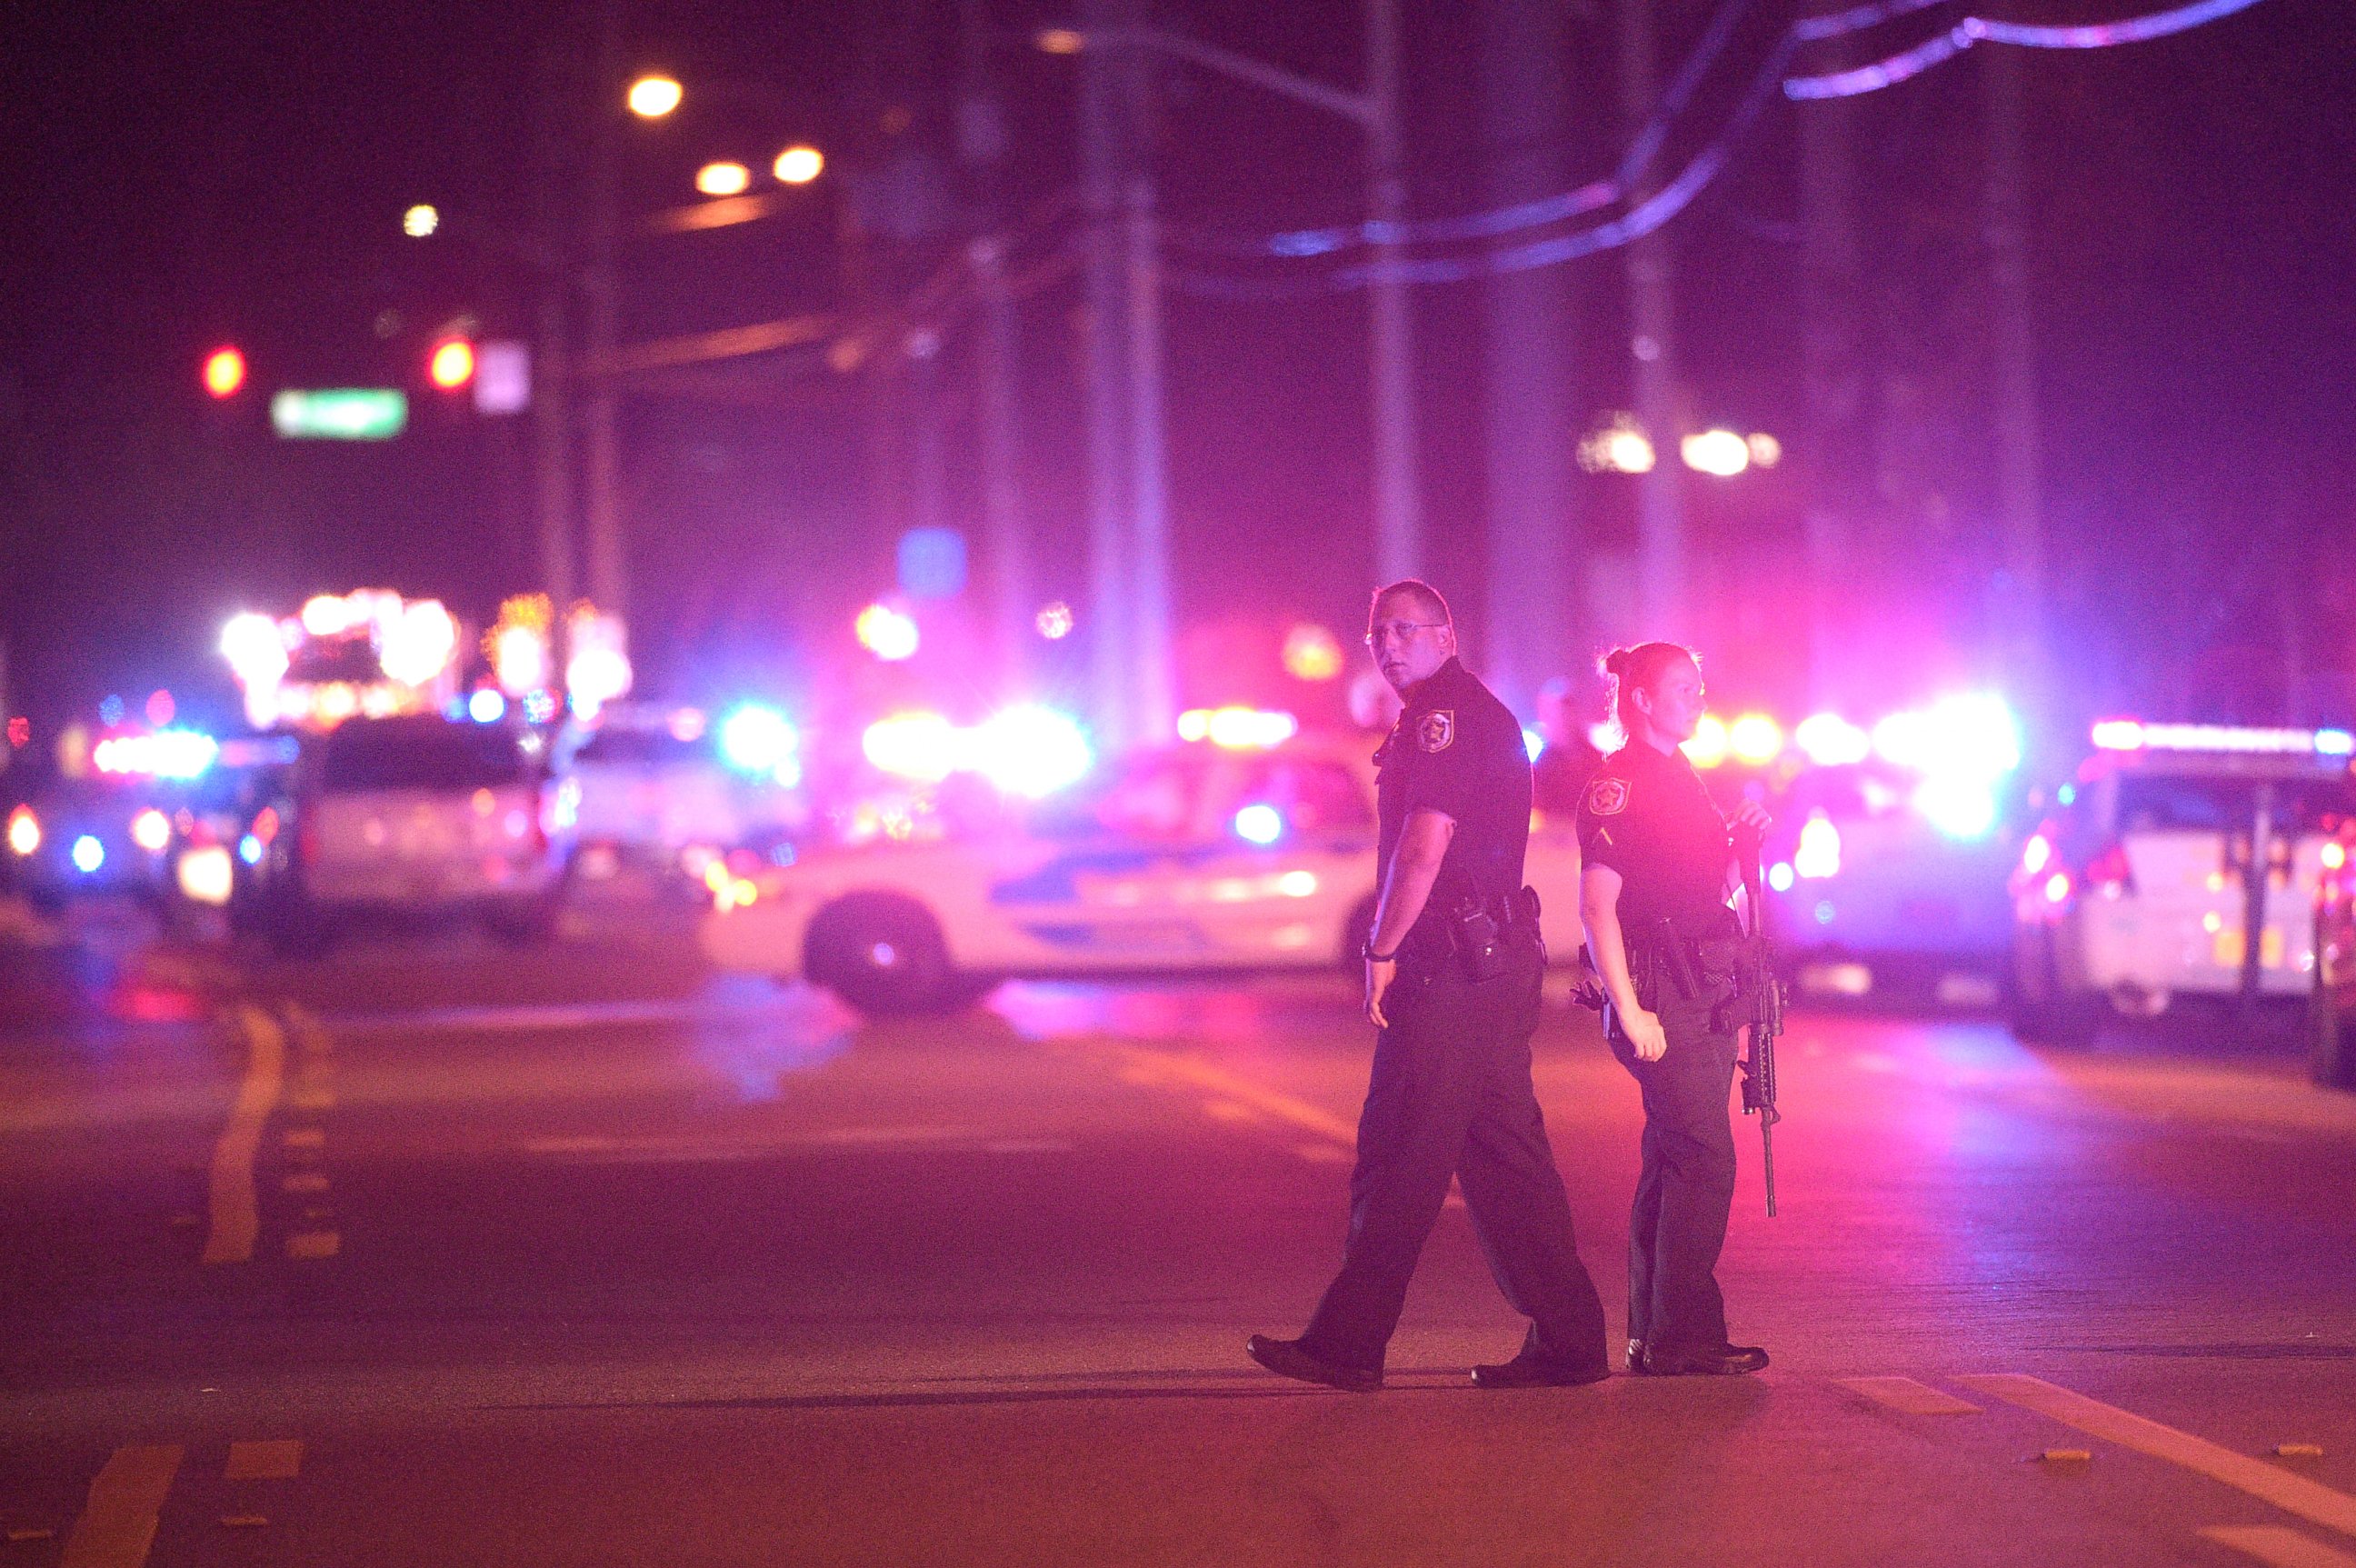 PHOTO: Police officers stand guard down the street from the scene of a shooting involving multiple fatalities at a nightclub in Orlando, Fla., June 12, 2016.